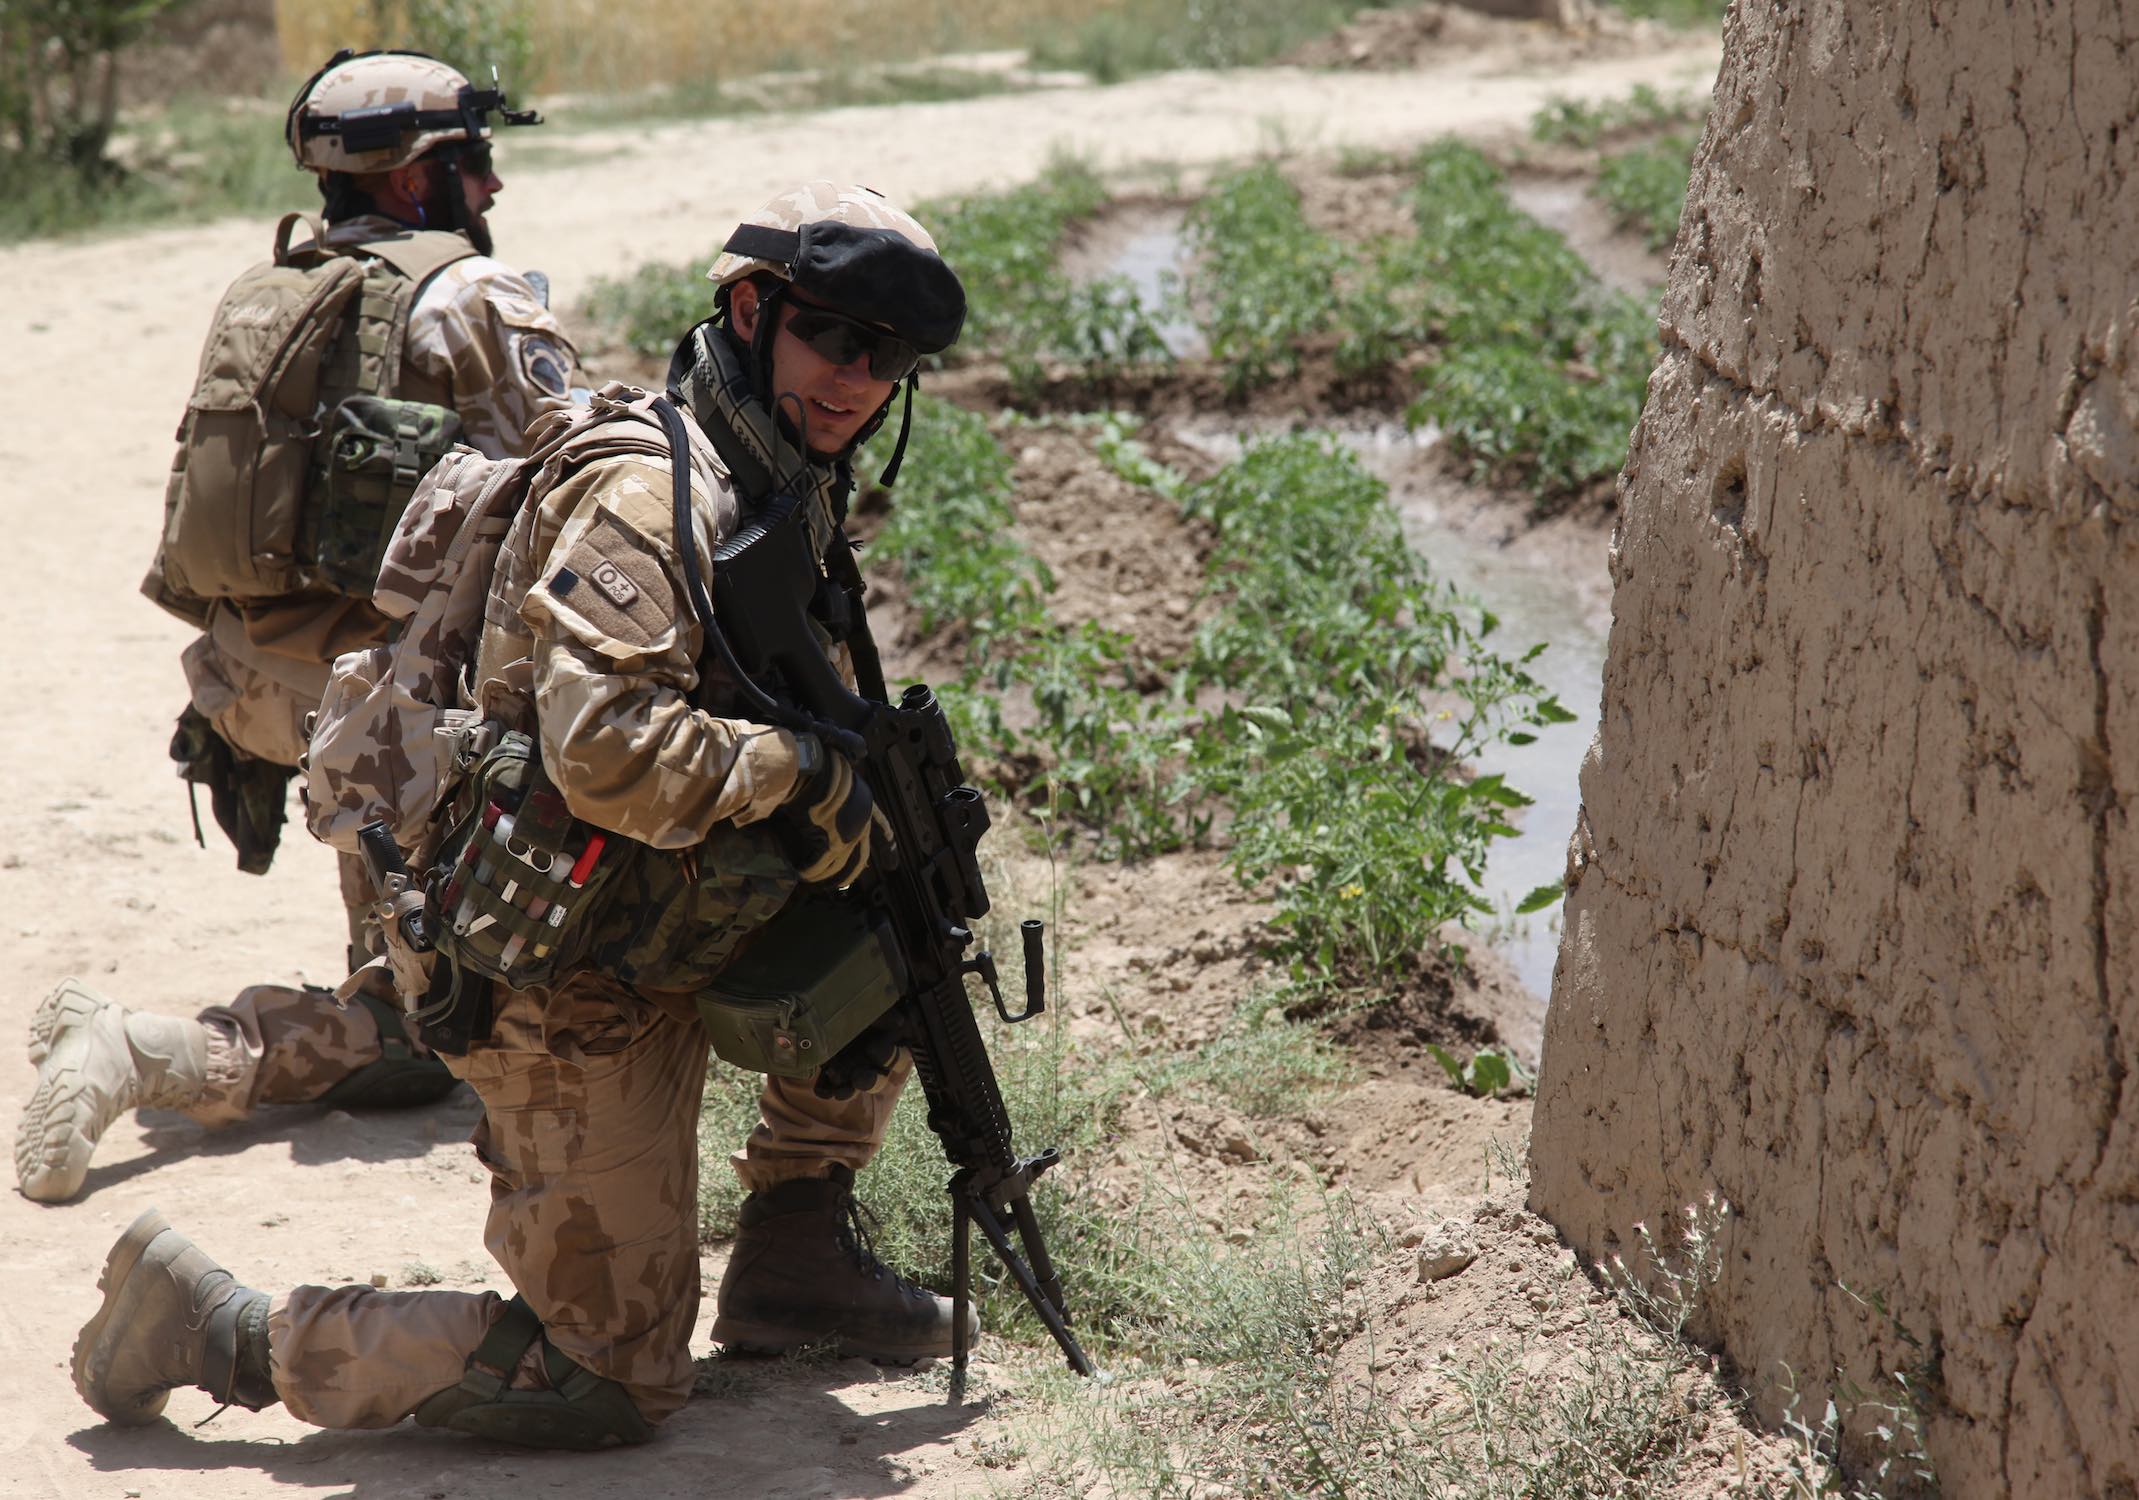 Soldiers from the Czech Republic provide security during a route clearance mission in the Baraki Barak district of Logar province, Afghanistan